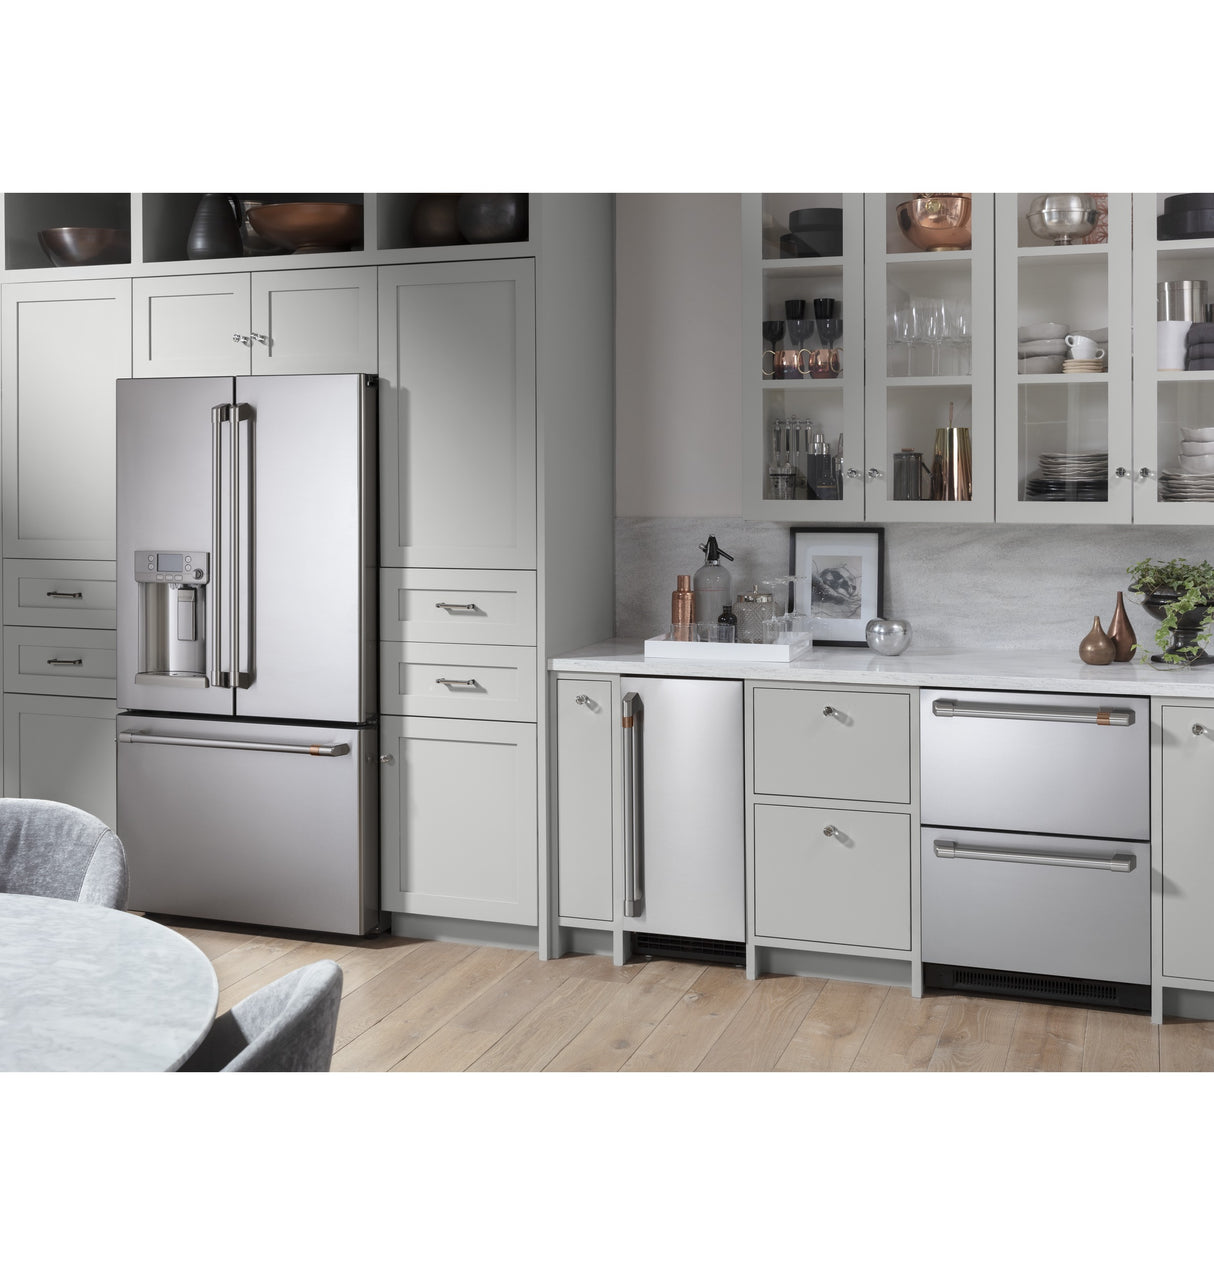 Caf(eback)(TM) ENERGY STAR(R) 22.1 Cu. Ft. Smart Counter-Depth French-Door Refrigerator with Keurig(R) K-Cup(R) Brewing System - (CYE22UP2MS1)